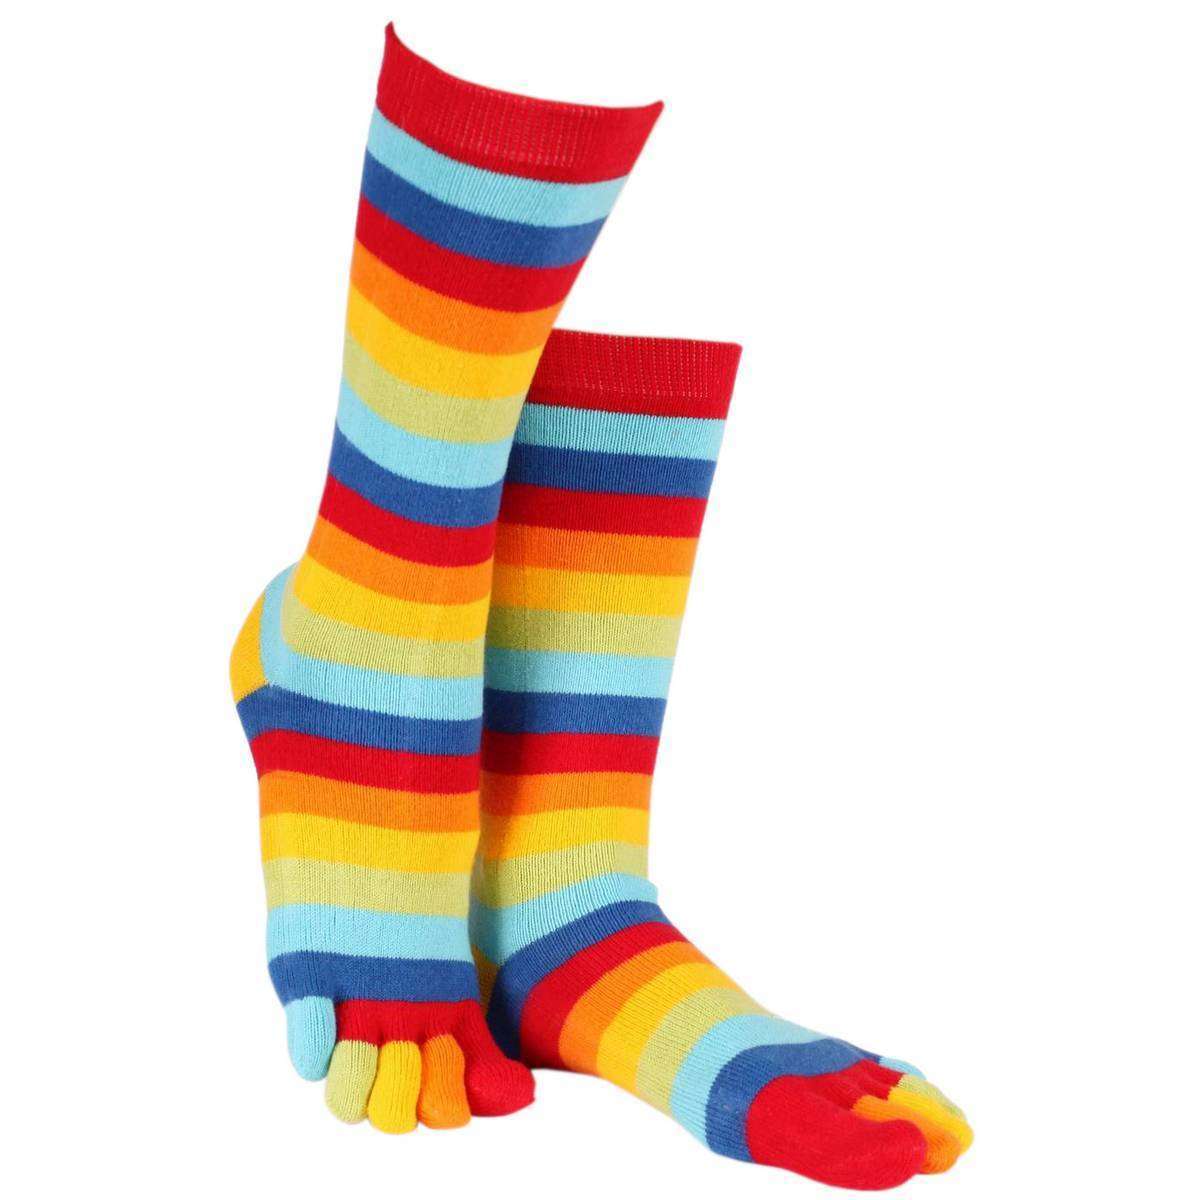 Assorted Multicolor Striped Fuzzy Toe Socks 6 Pack at